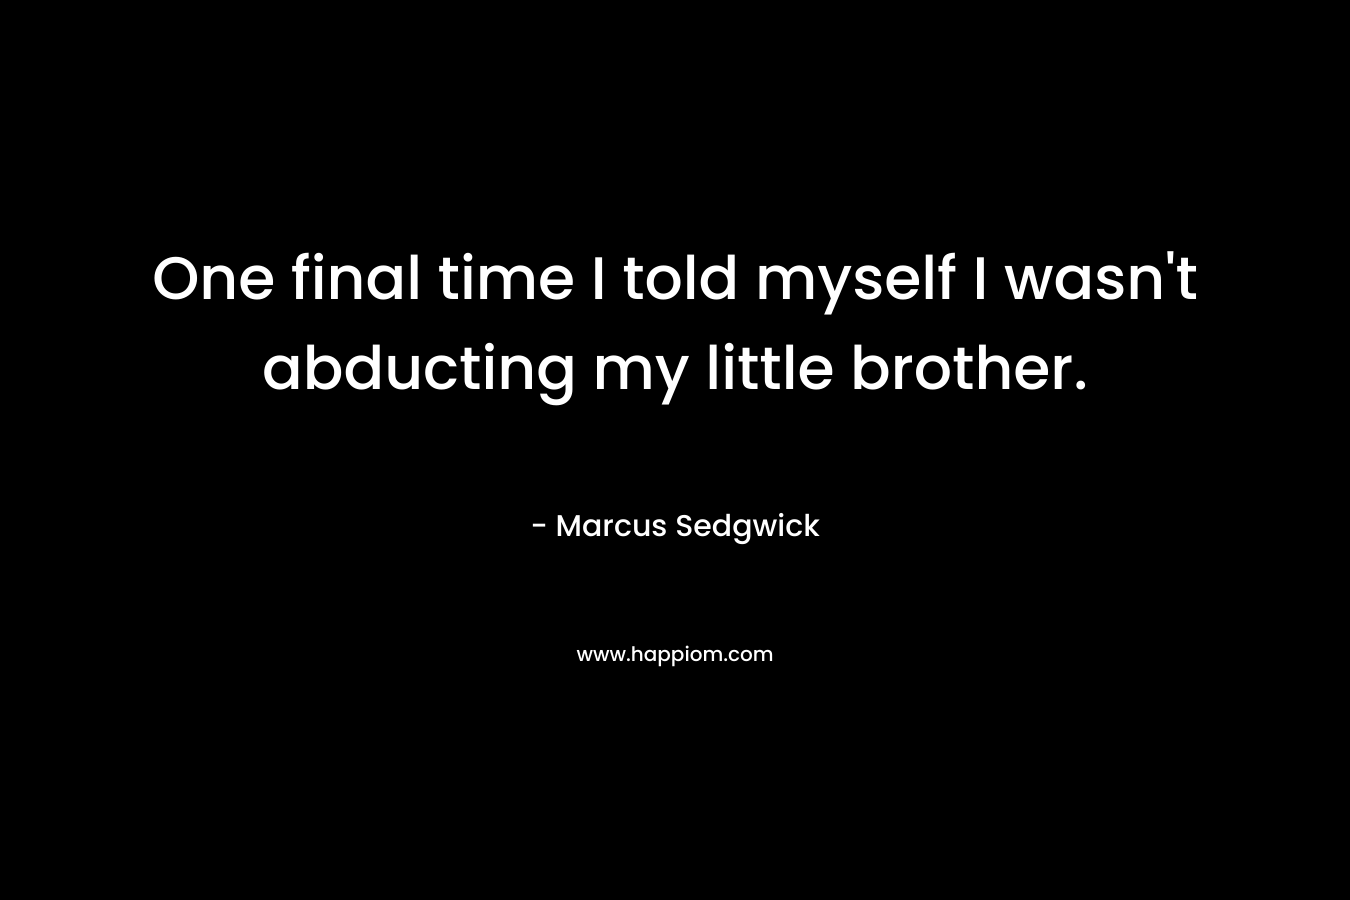 One final time I told myself I wasn’t abducting my little brother. – Marcus Sedgwick